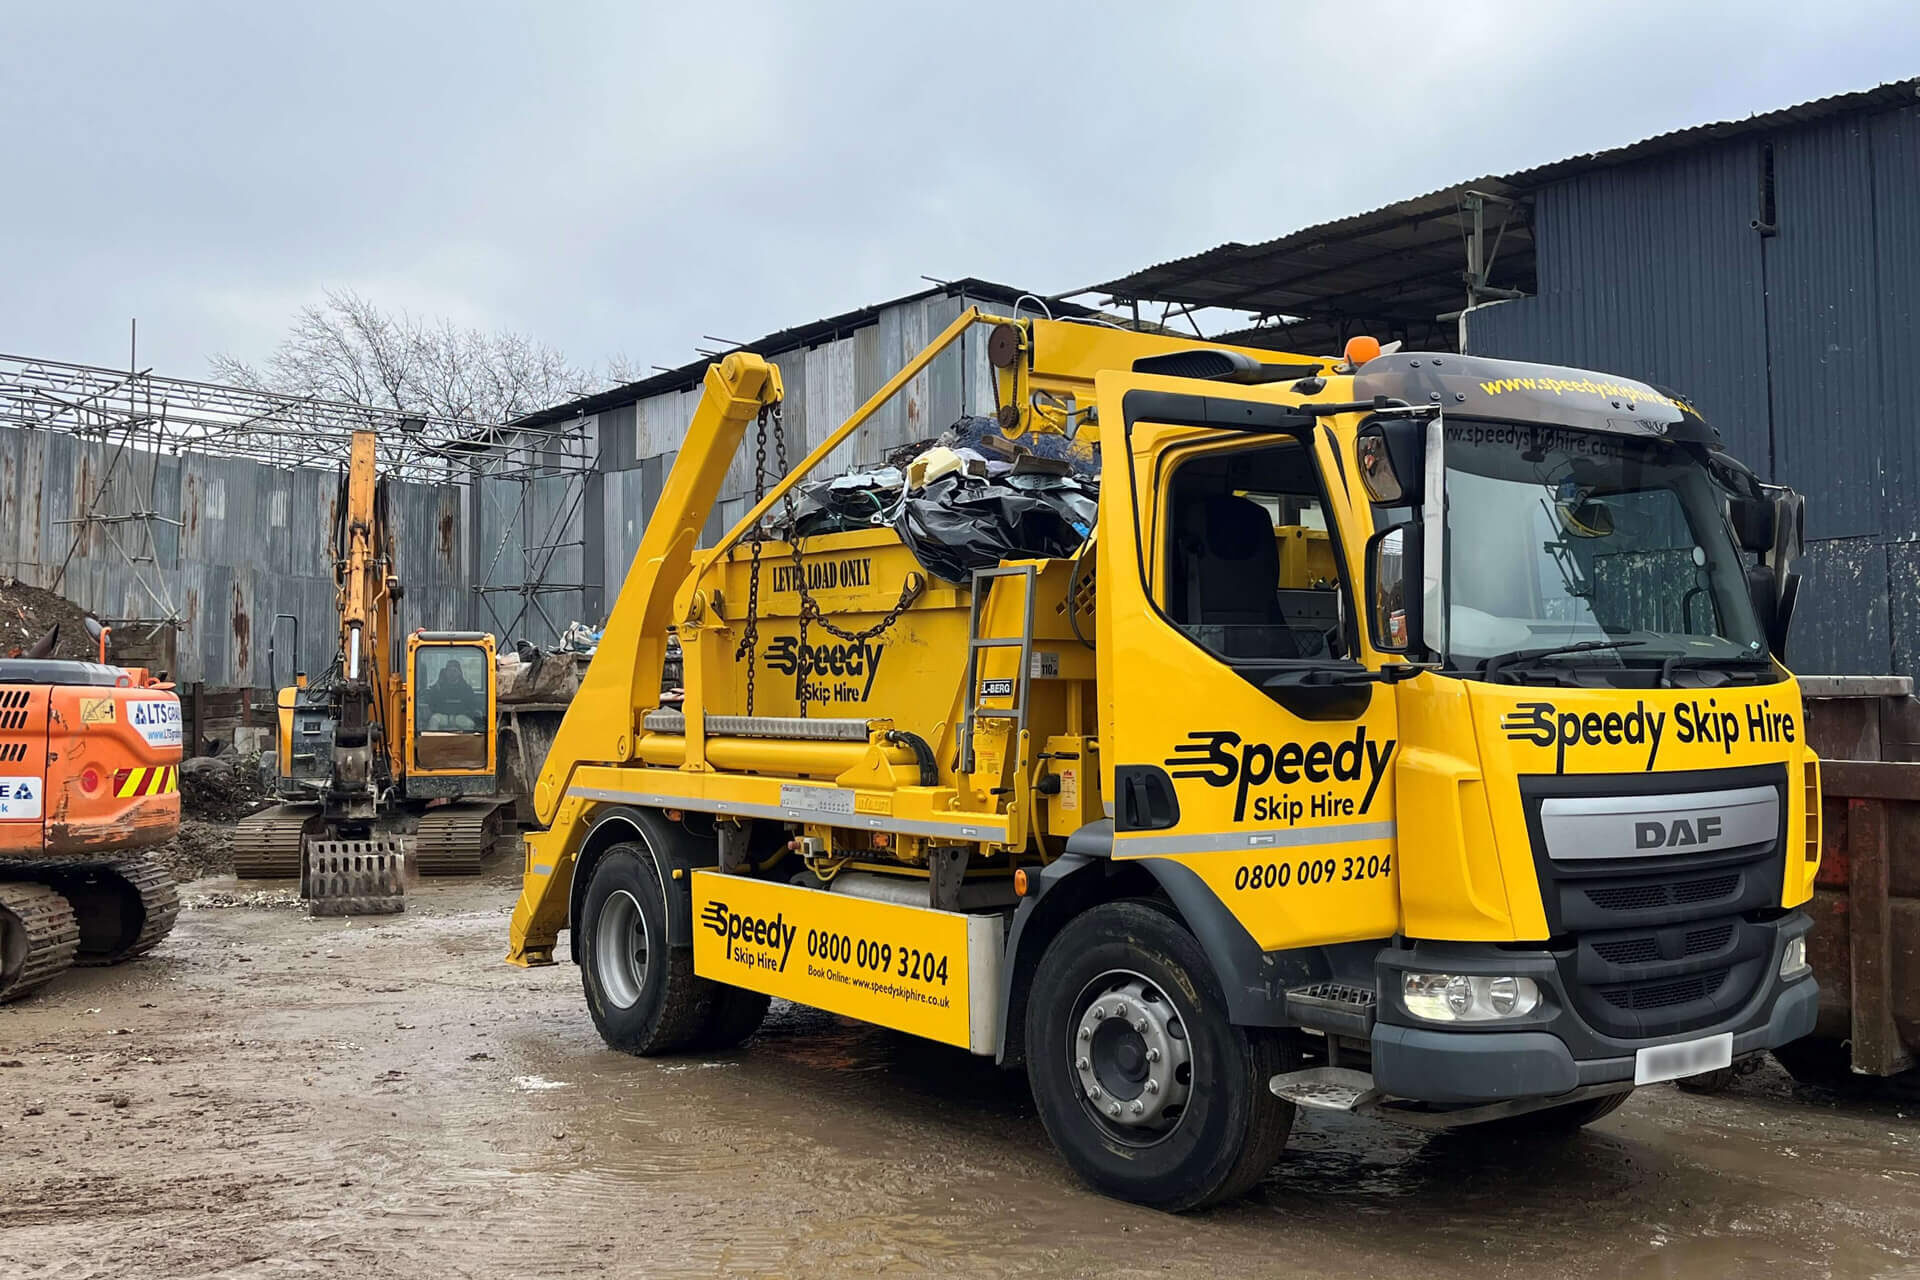 Local Surrey & Greater London Skip Hire & Waste Clearance experts